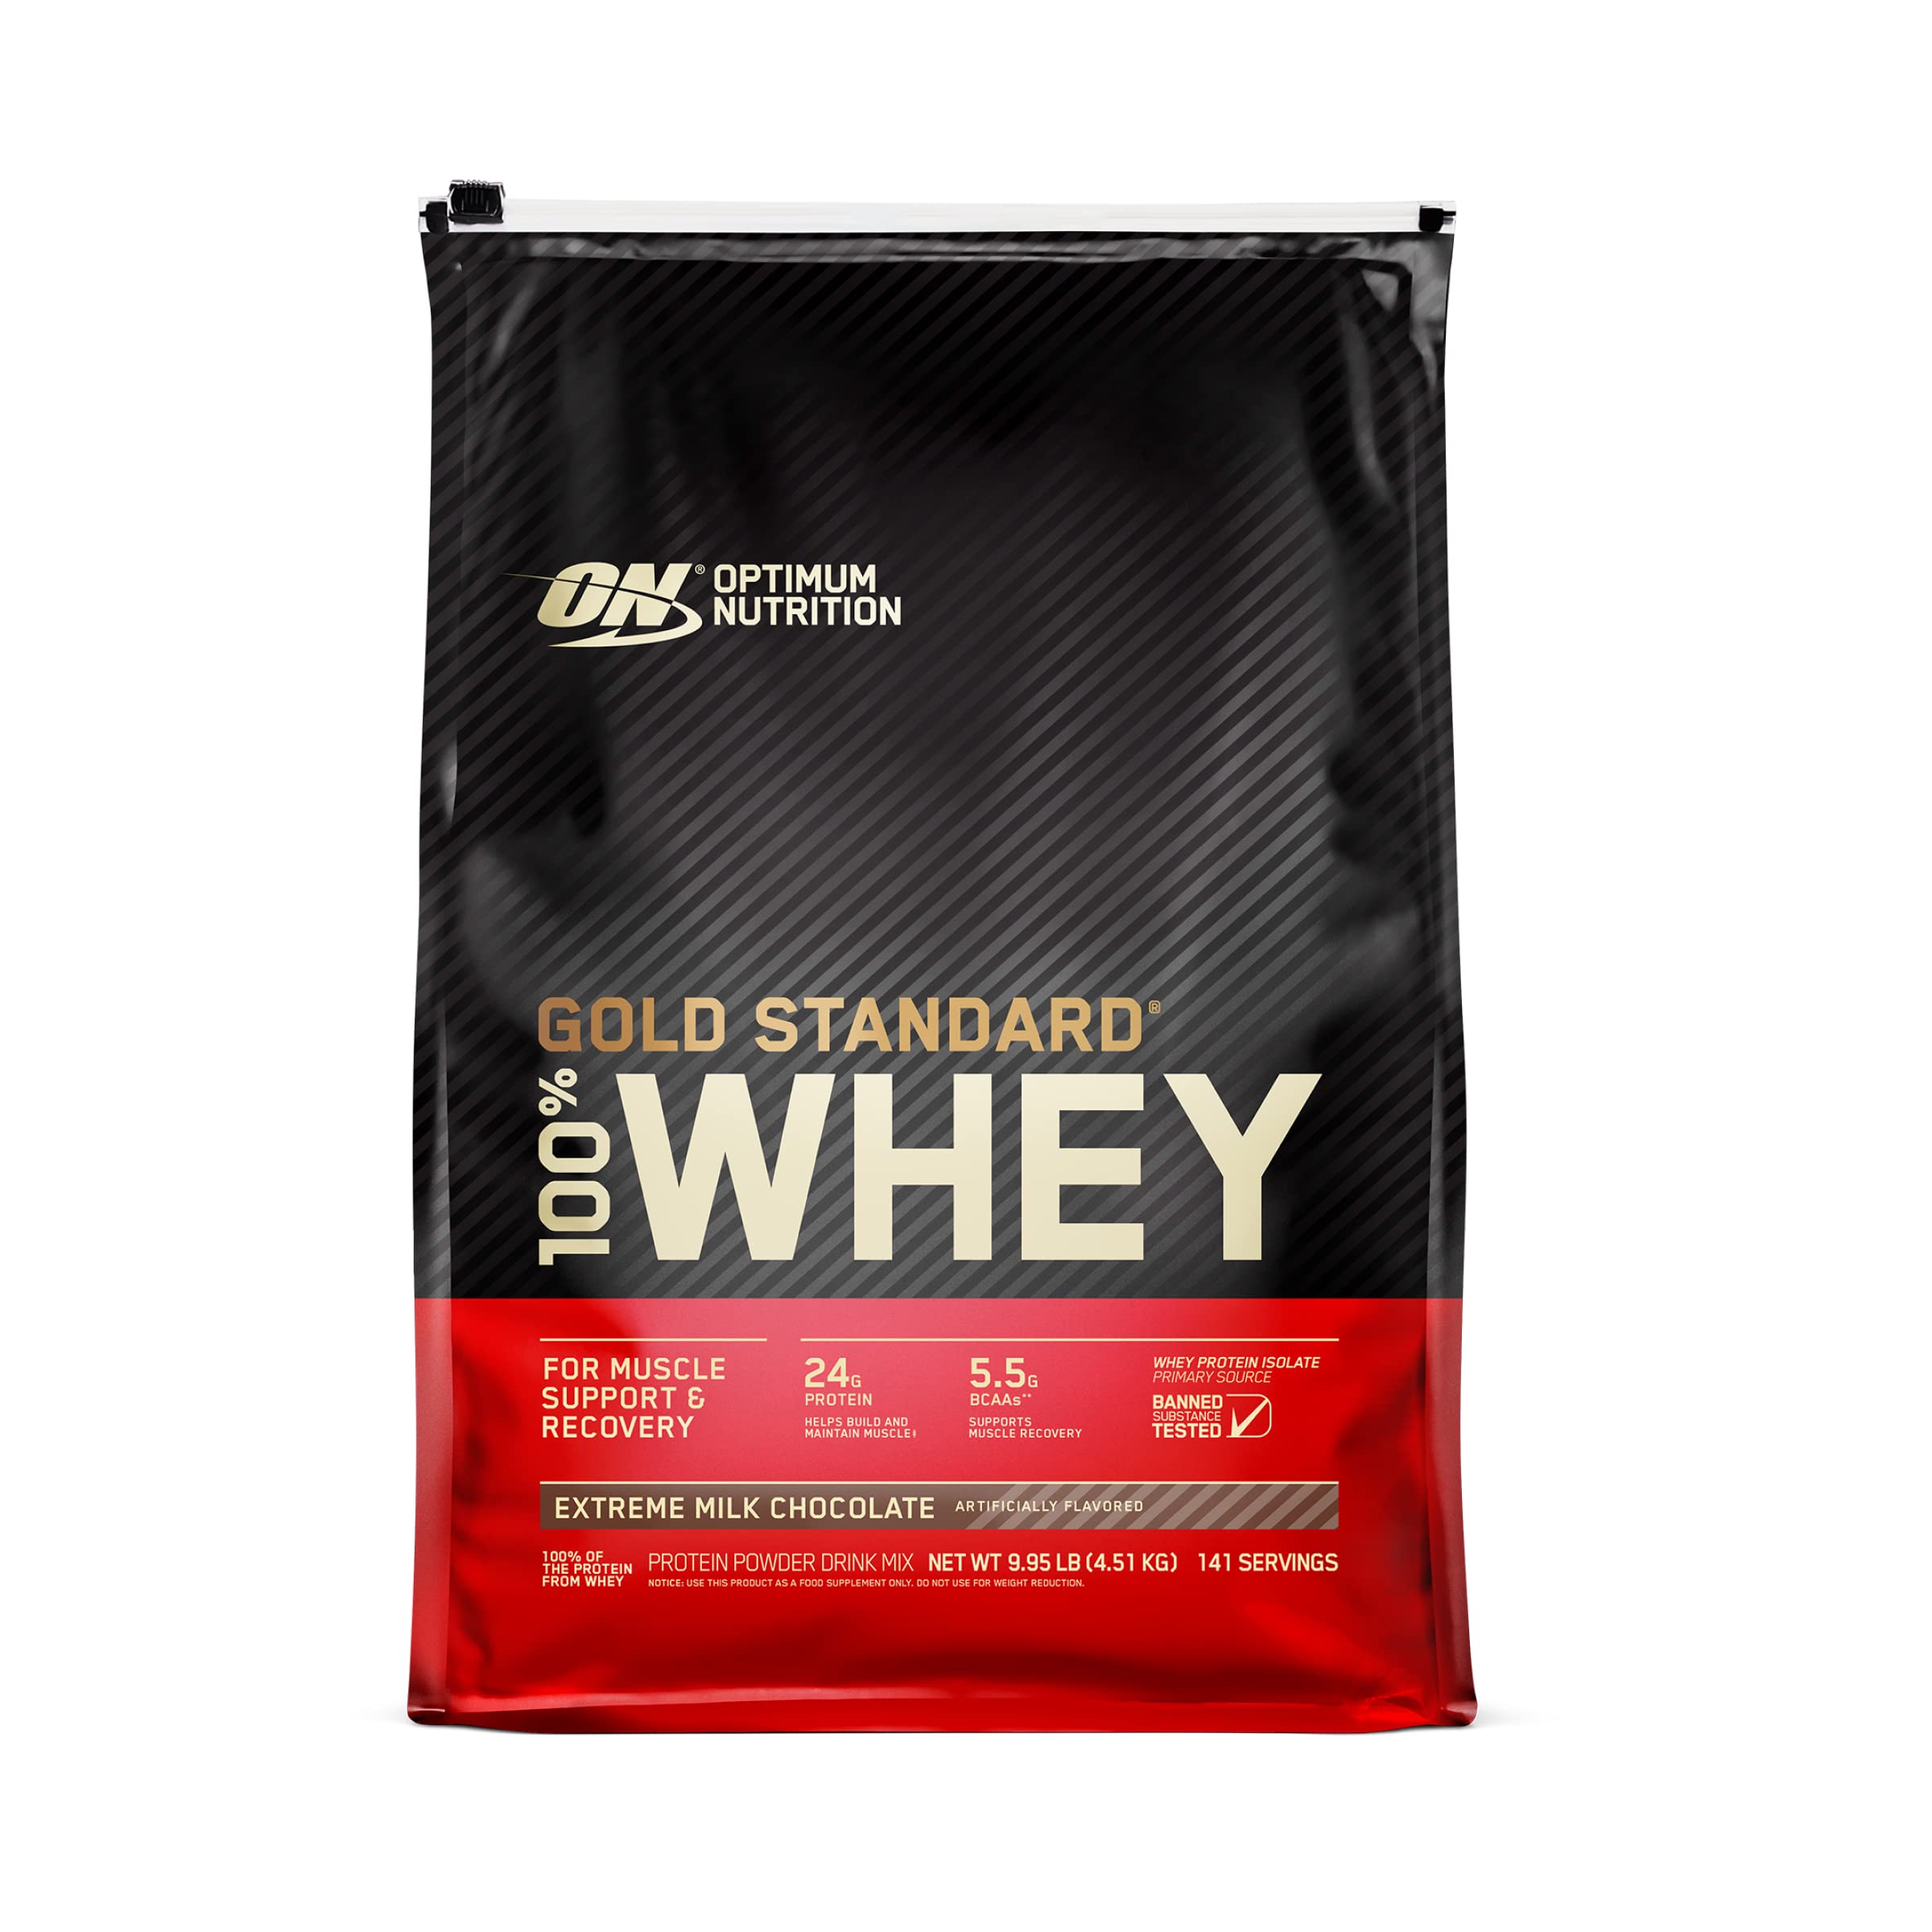 Optimum Nutrition Gold Standard 100% Whey Protein Powder & Serious Mass Weight Gainer Protein Powder, Vitamin C, Zinc and Vitamin D for Immune Support, Chocolate, 12 Pound (Packaging May Vary)